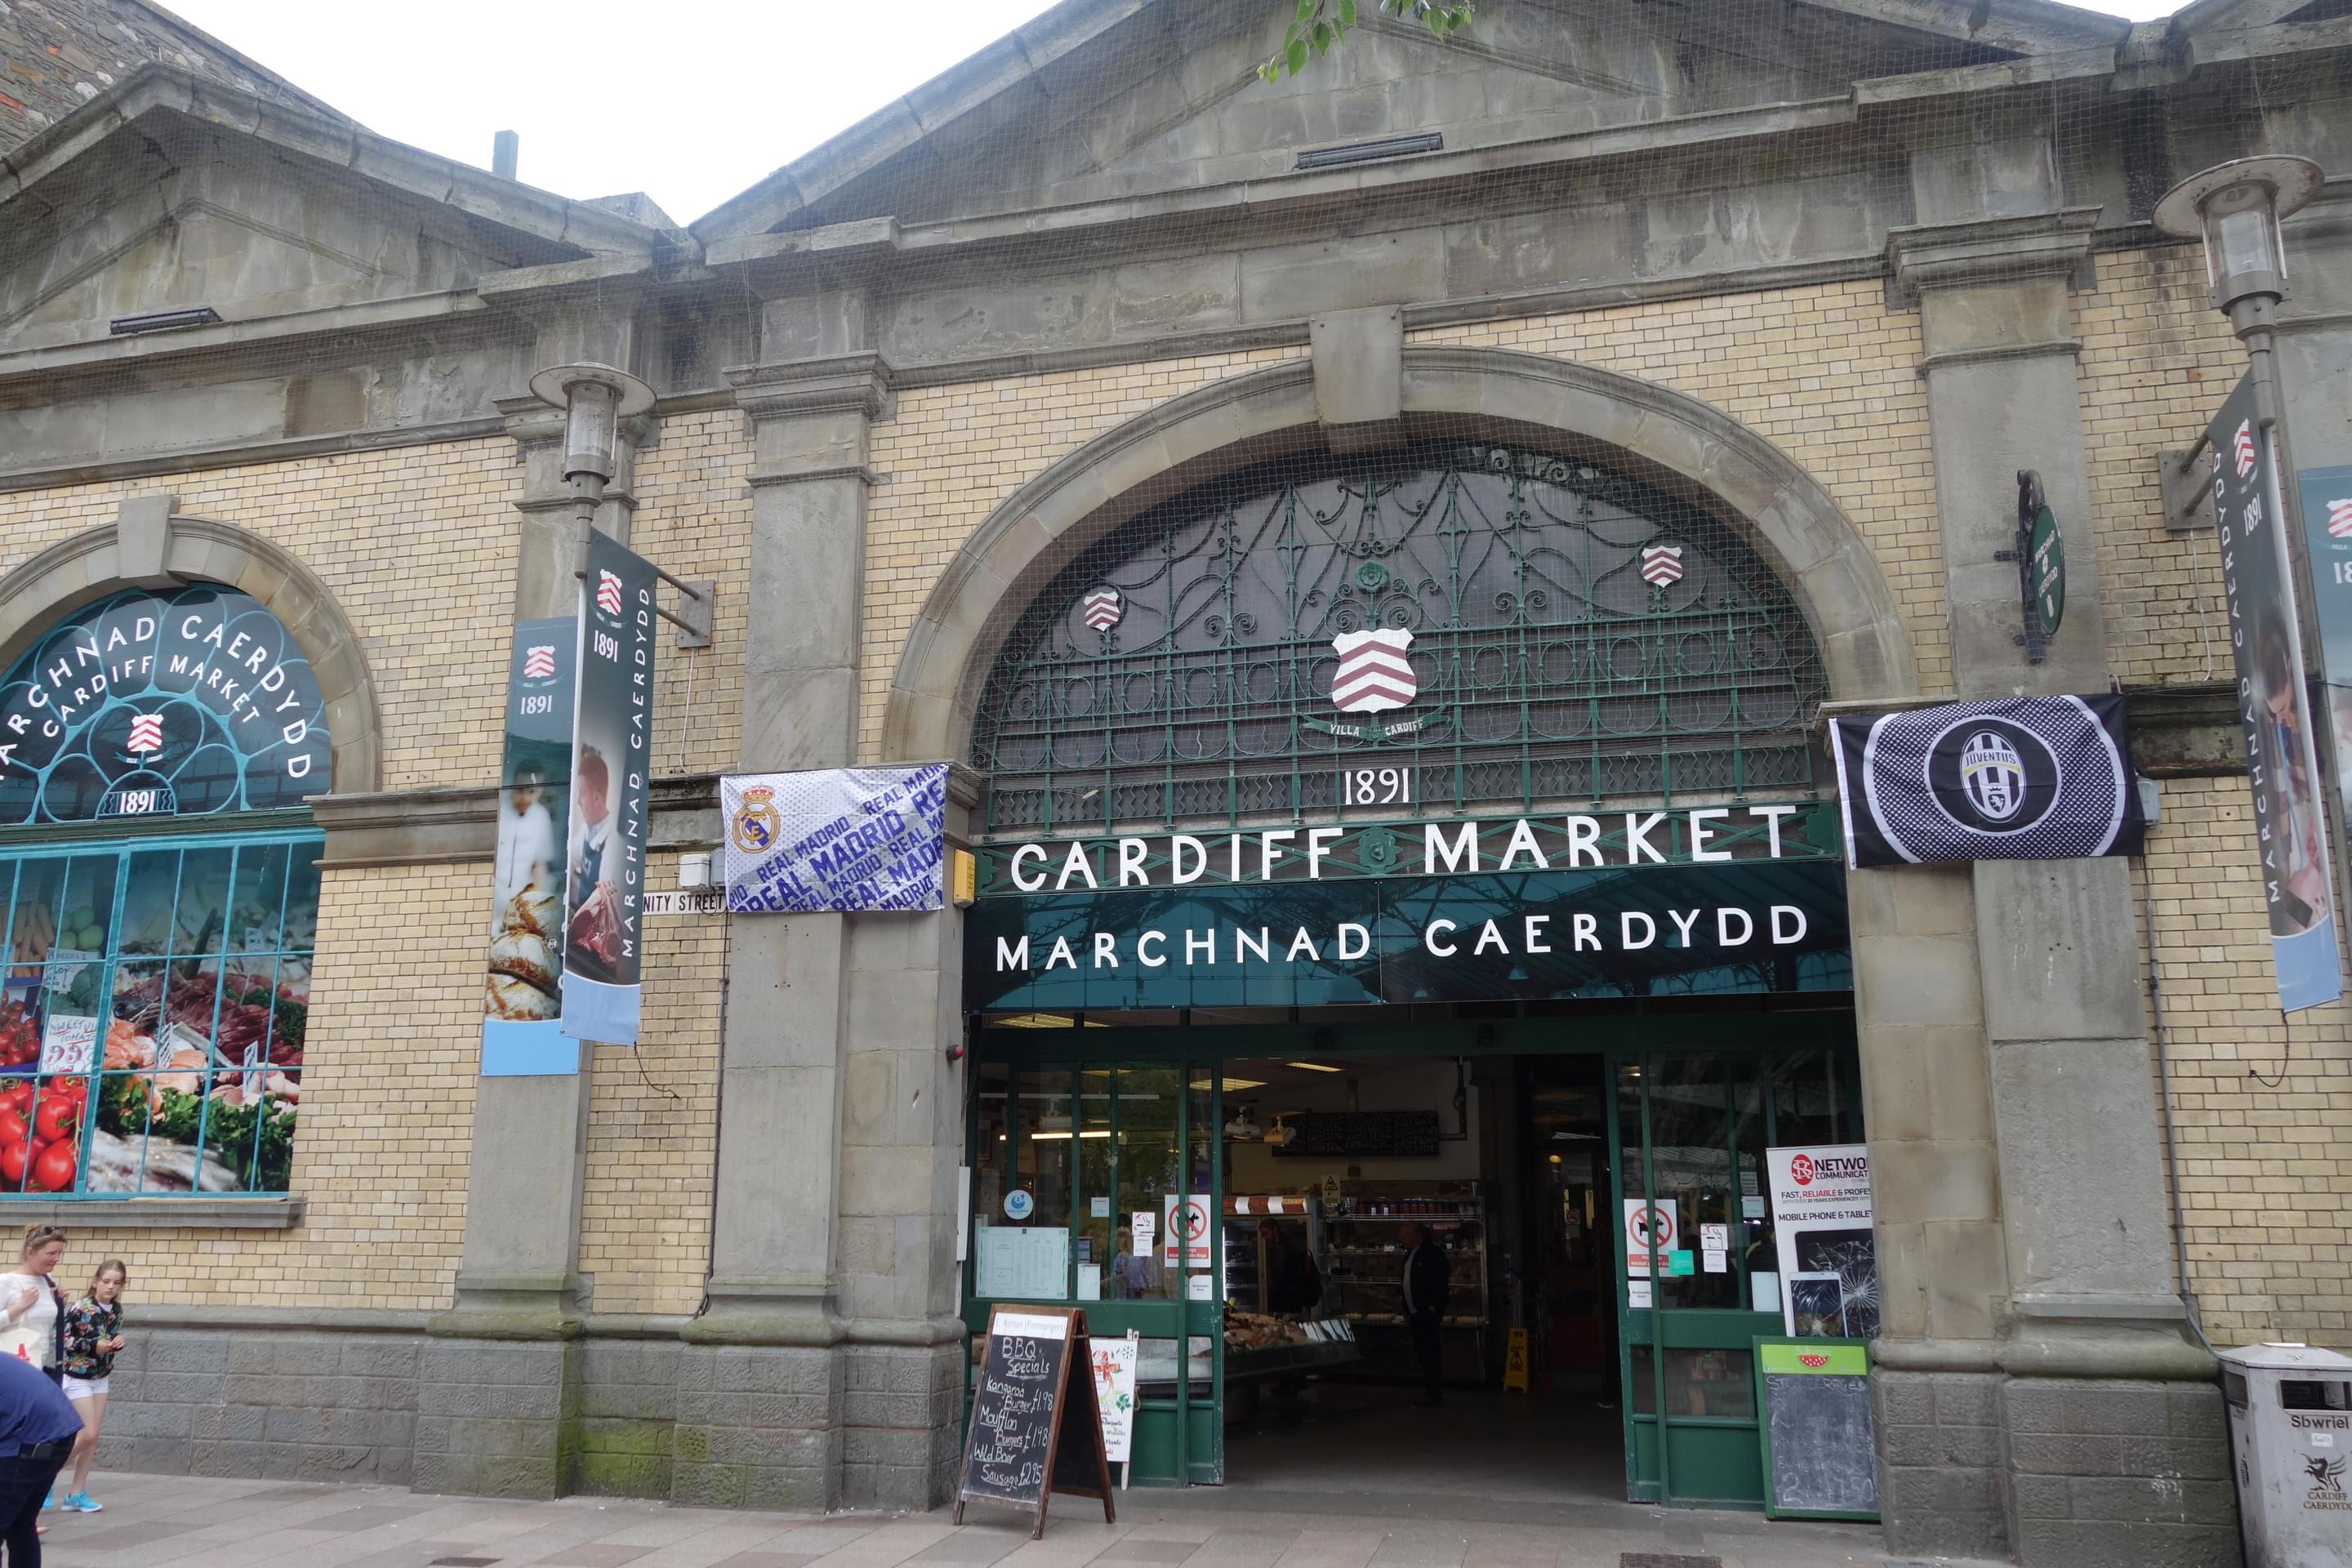 Cardiff Market Overview